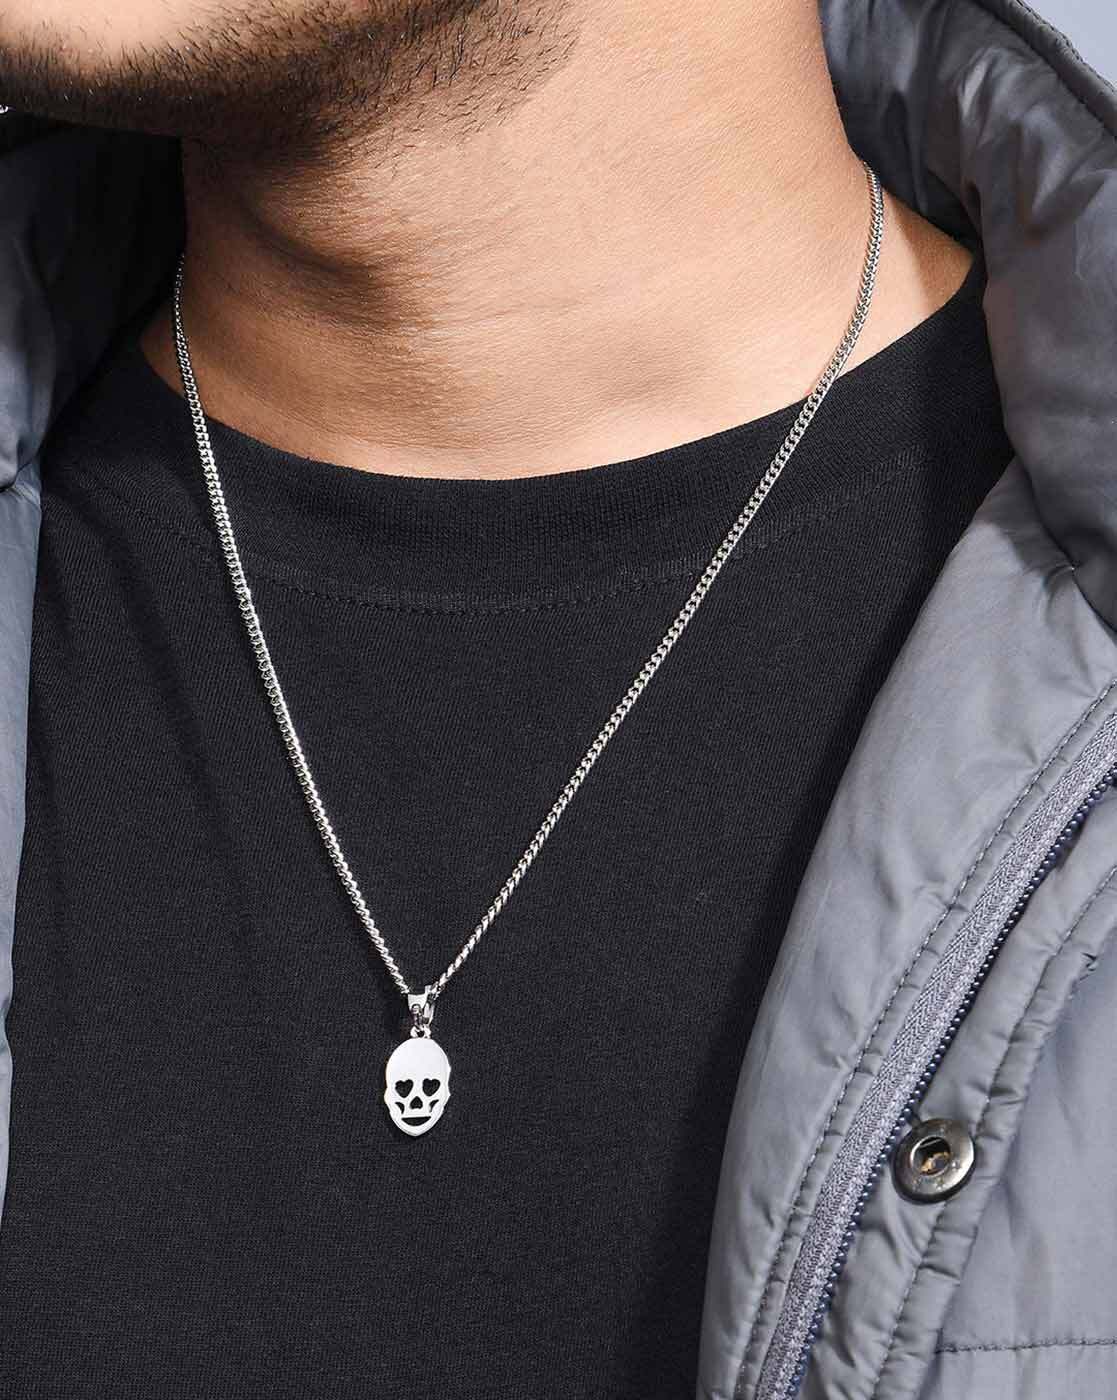 Vintage 316L Stainless Steel Open Jaw Skull Pendant Necklace Men's Skull  Motorcyclist Rock and Roll Gothic Punk Jewelry | Wish